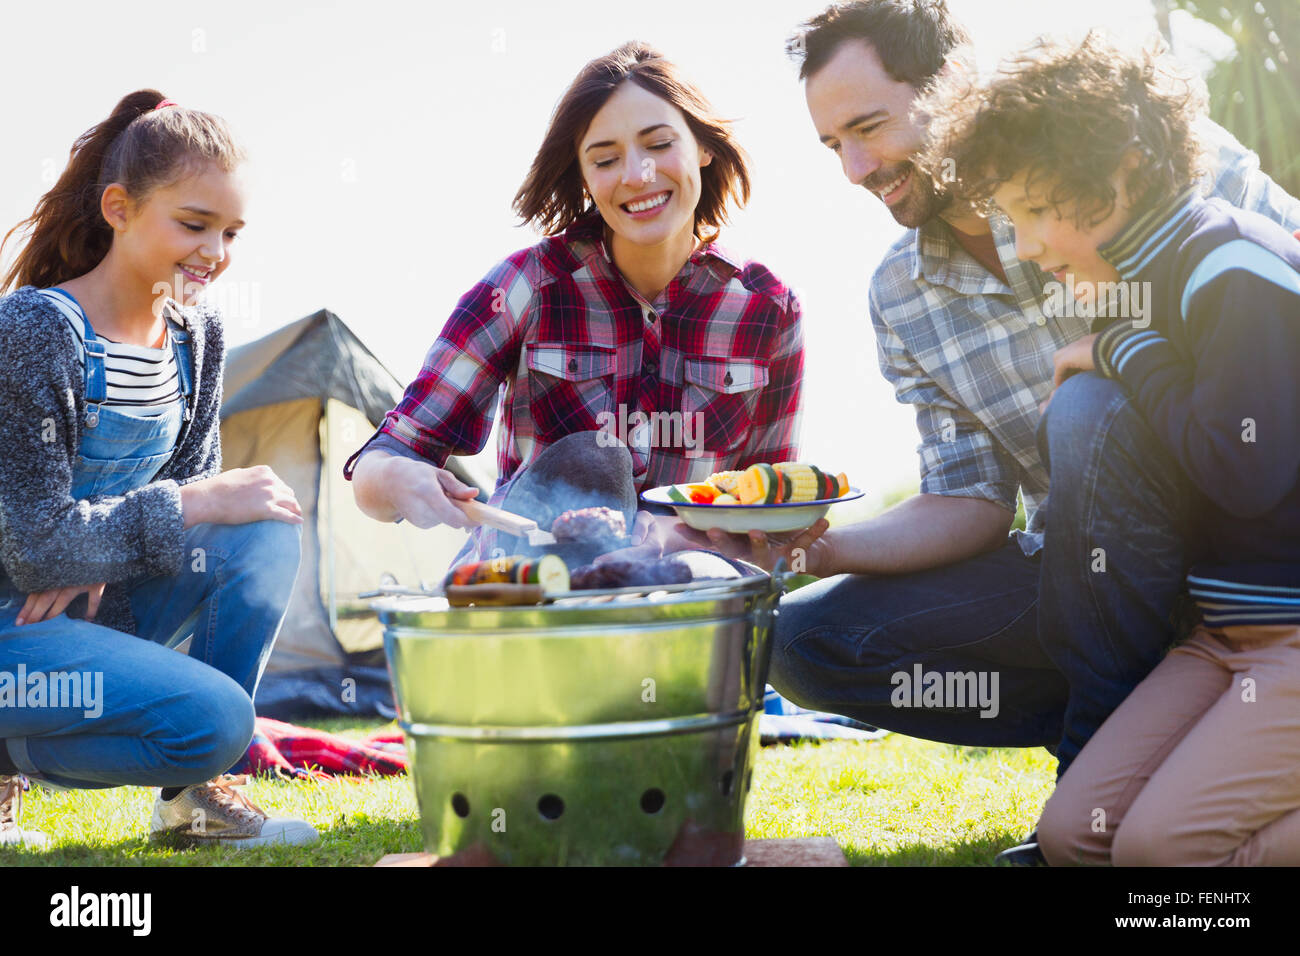 Family barbecuing at campsite grill Stock Photo